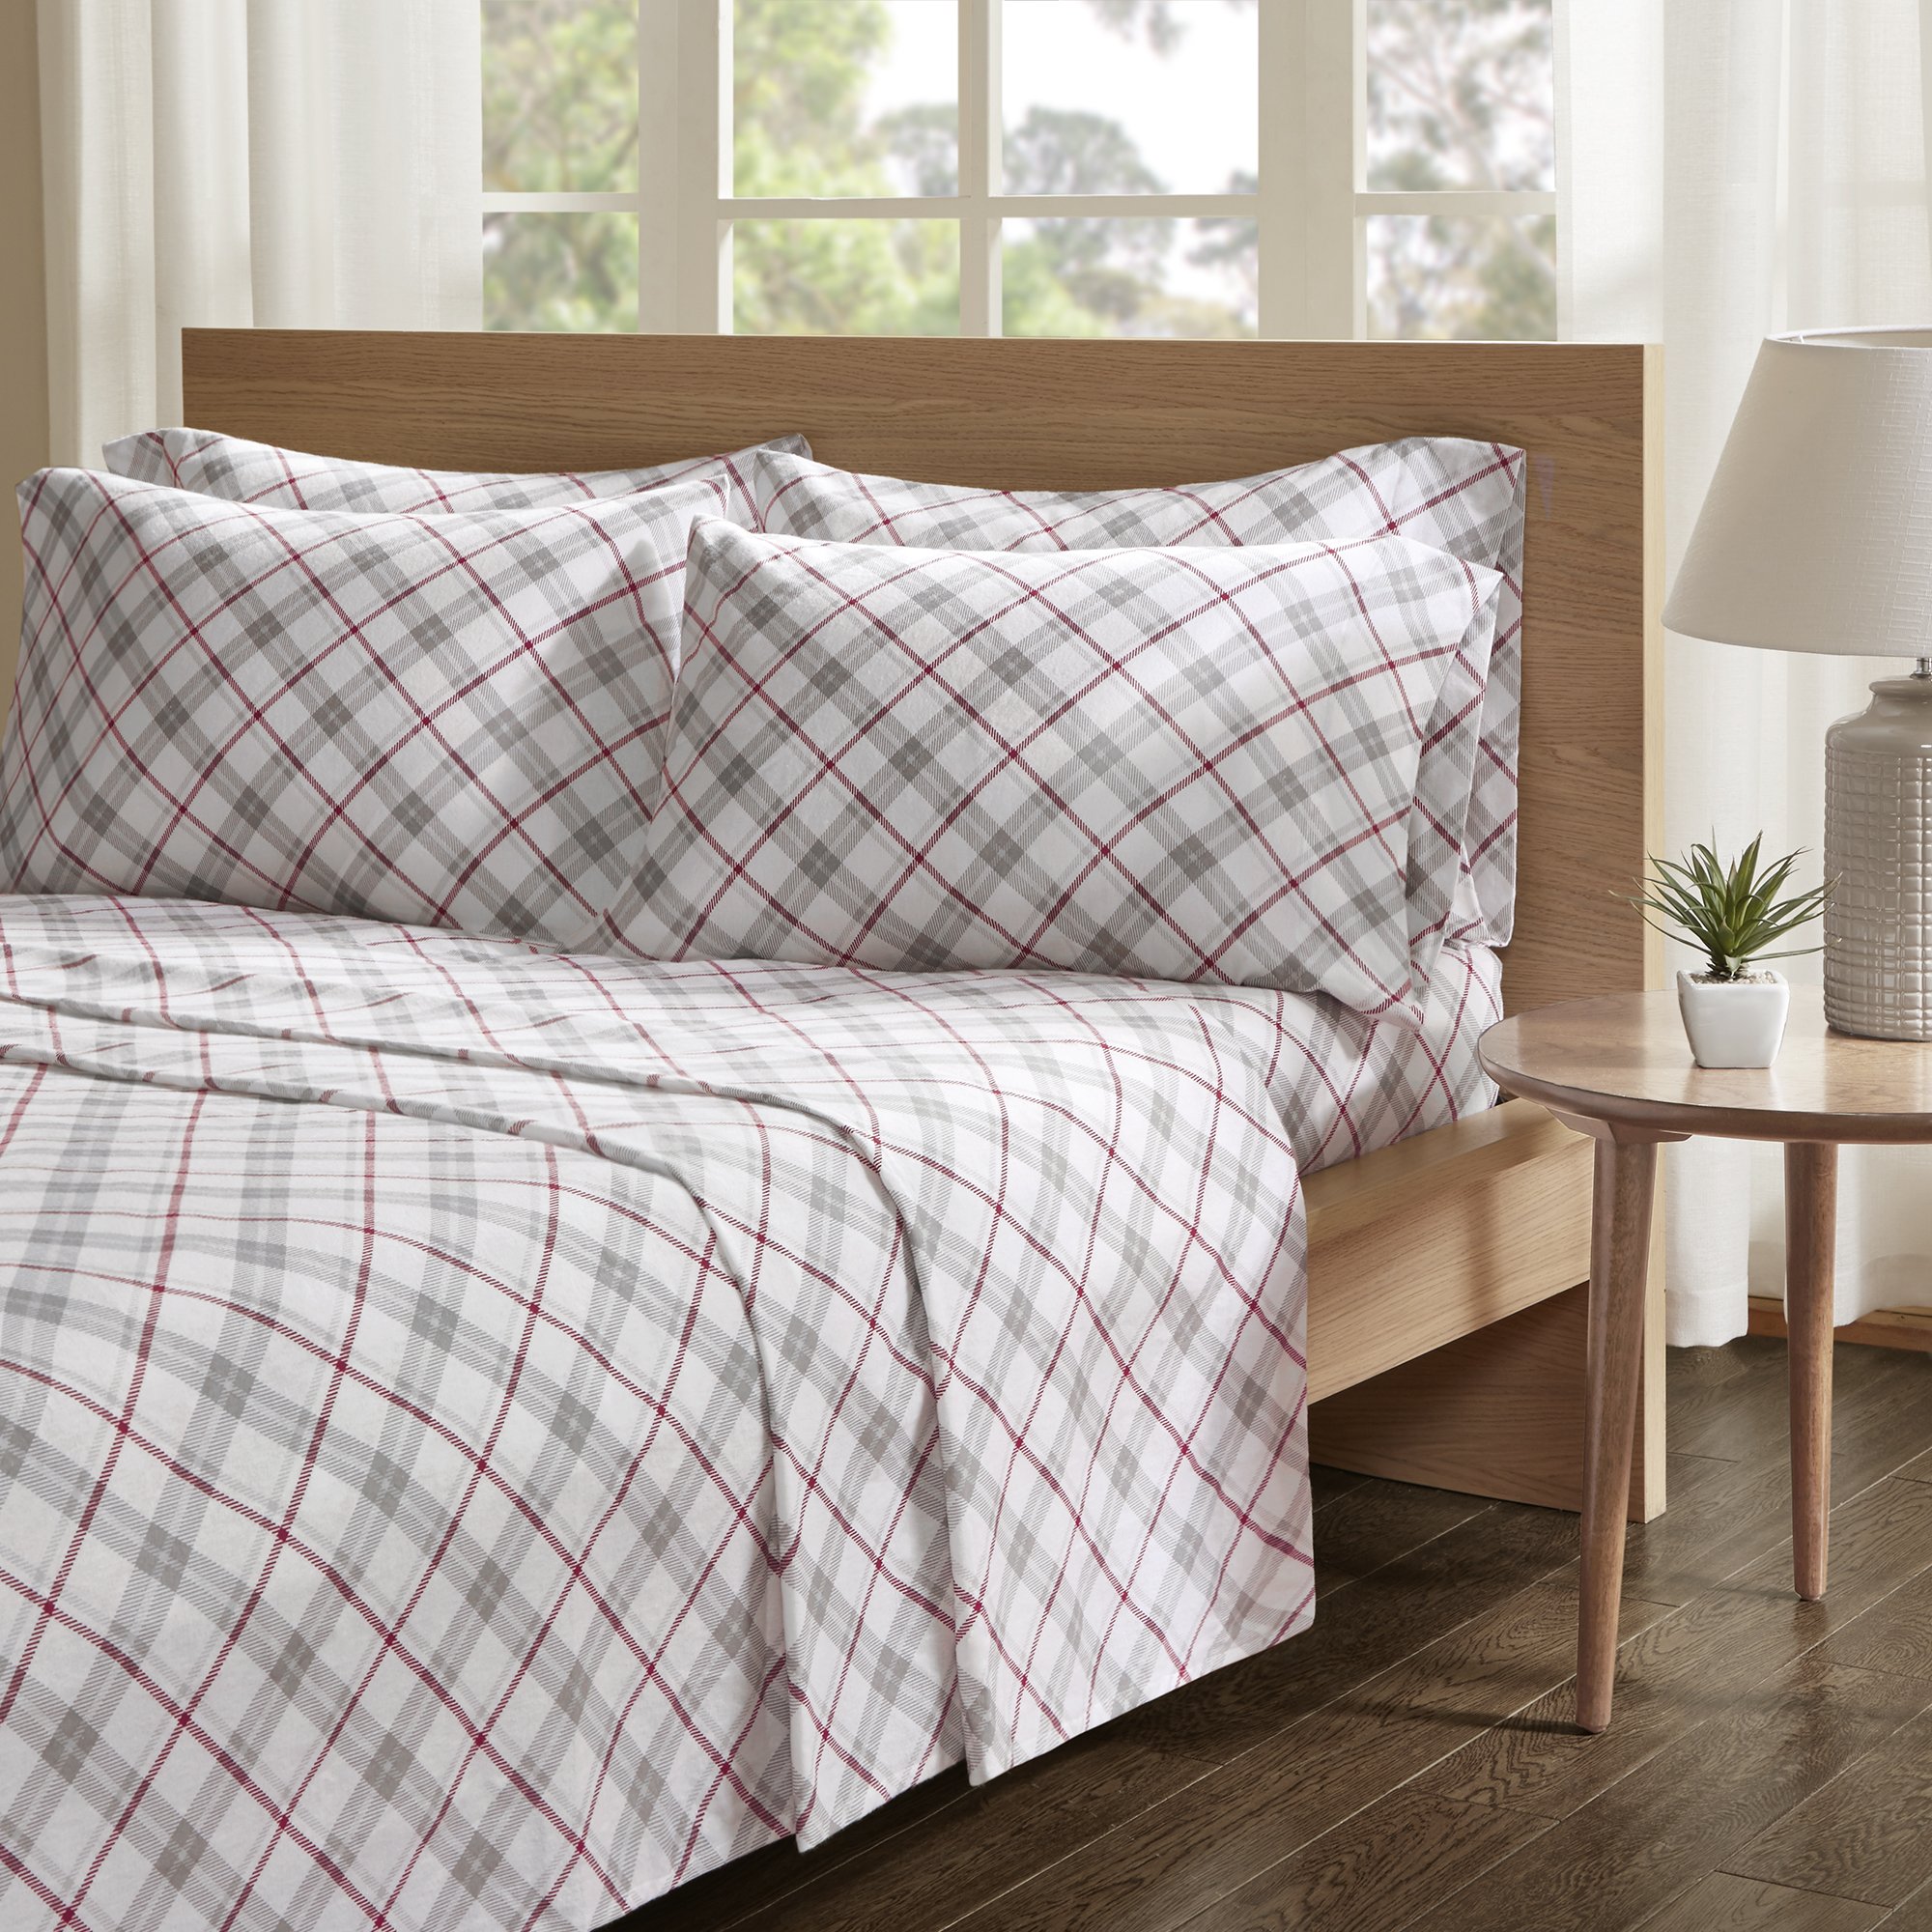 comfort Spaces cotton Flannel Breathable Warm Deep Pocket Sheets with Pillow case Bedding, Full, greyRed Plaid 4 Piece